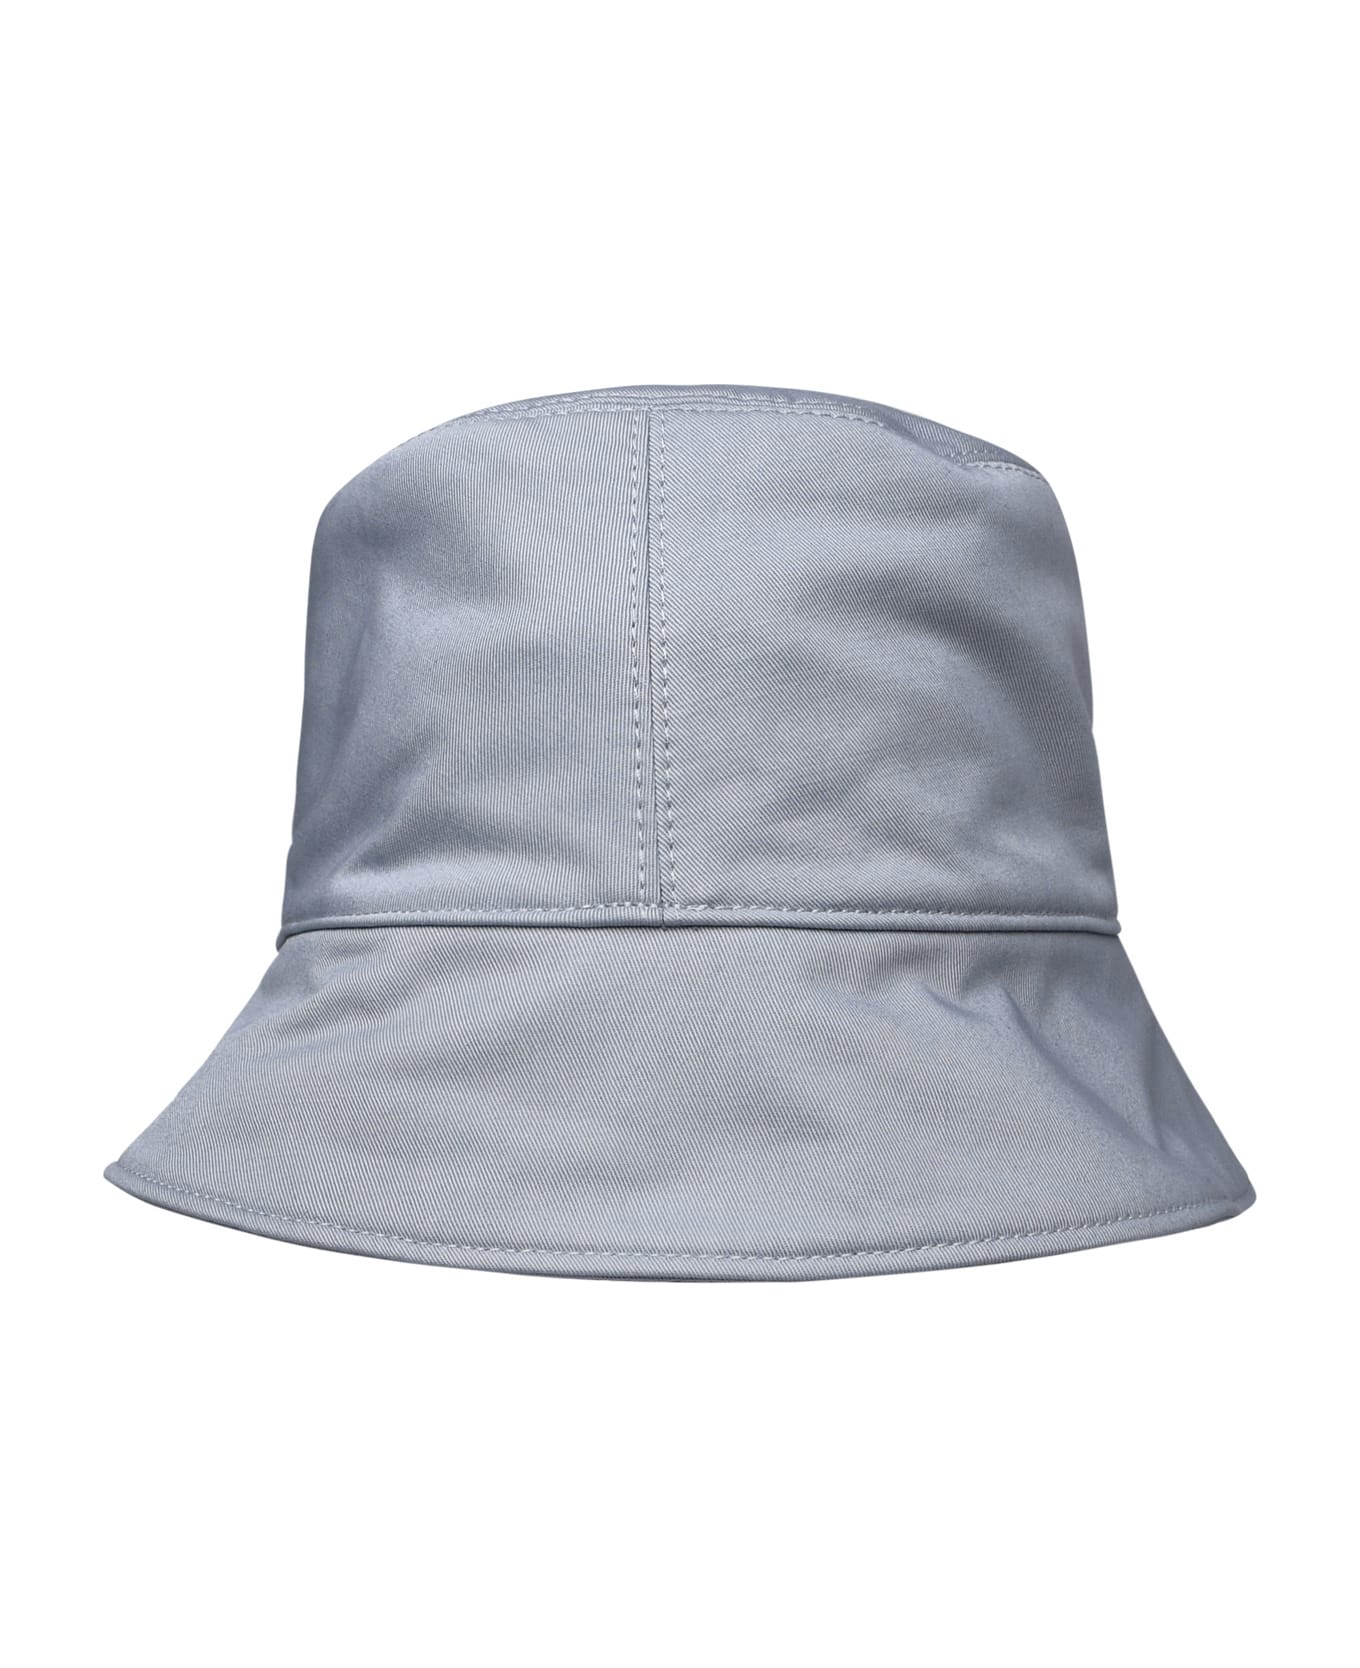 Off-White Logo Embroidered Bucket Hat - Light Blue 帽子